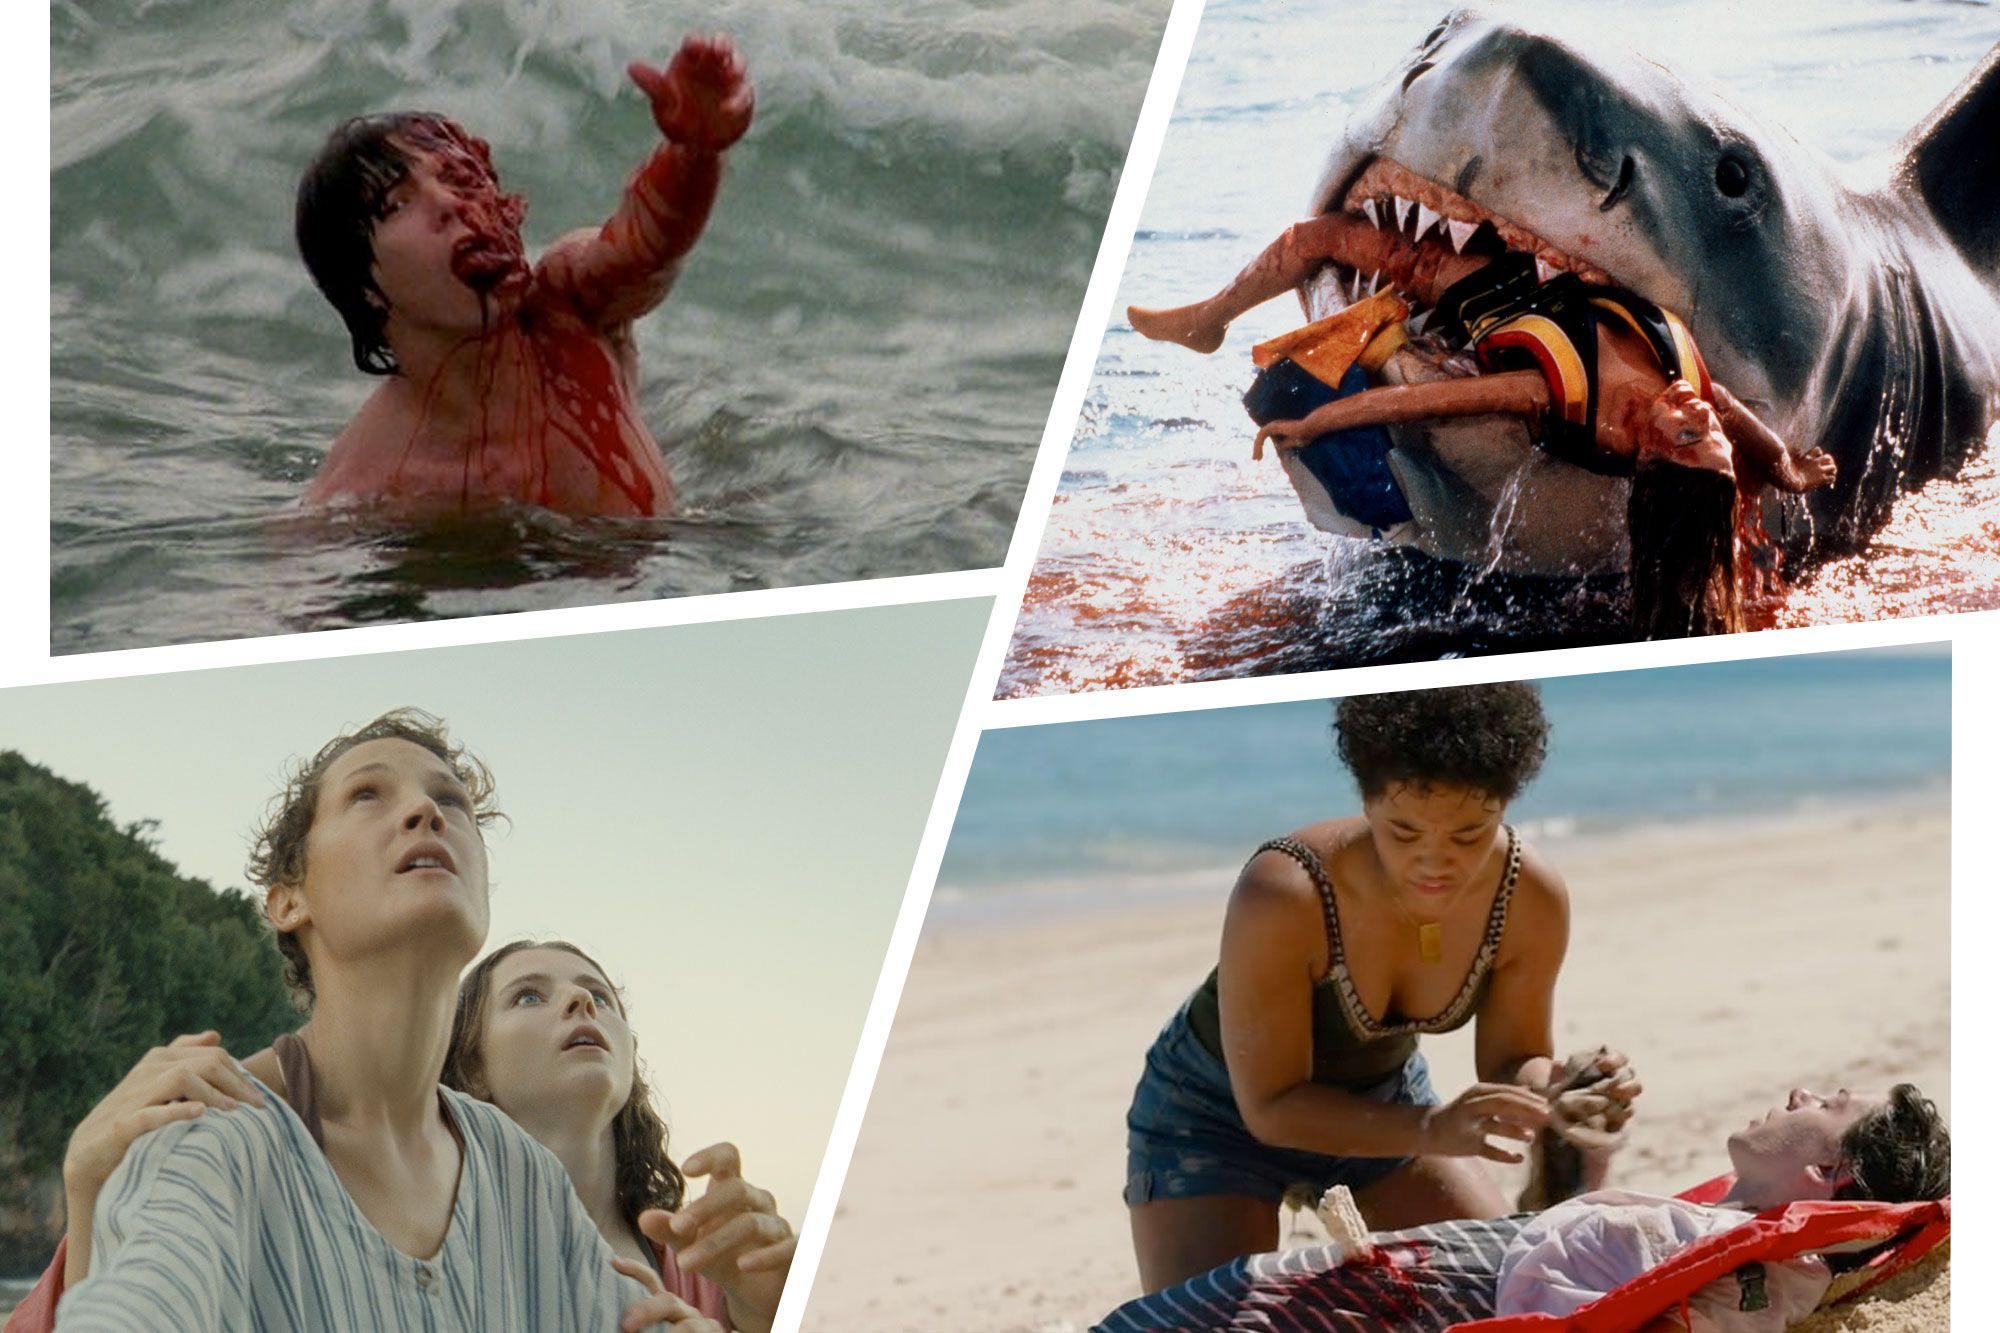 The Best Seaside Horror Movies to Watch This Summer image pic